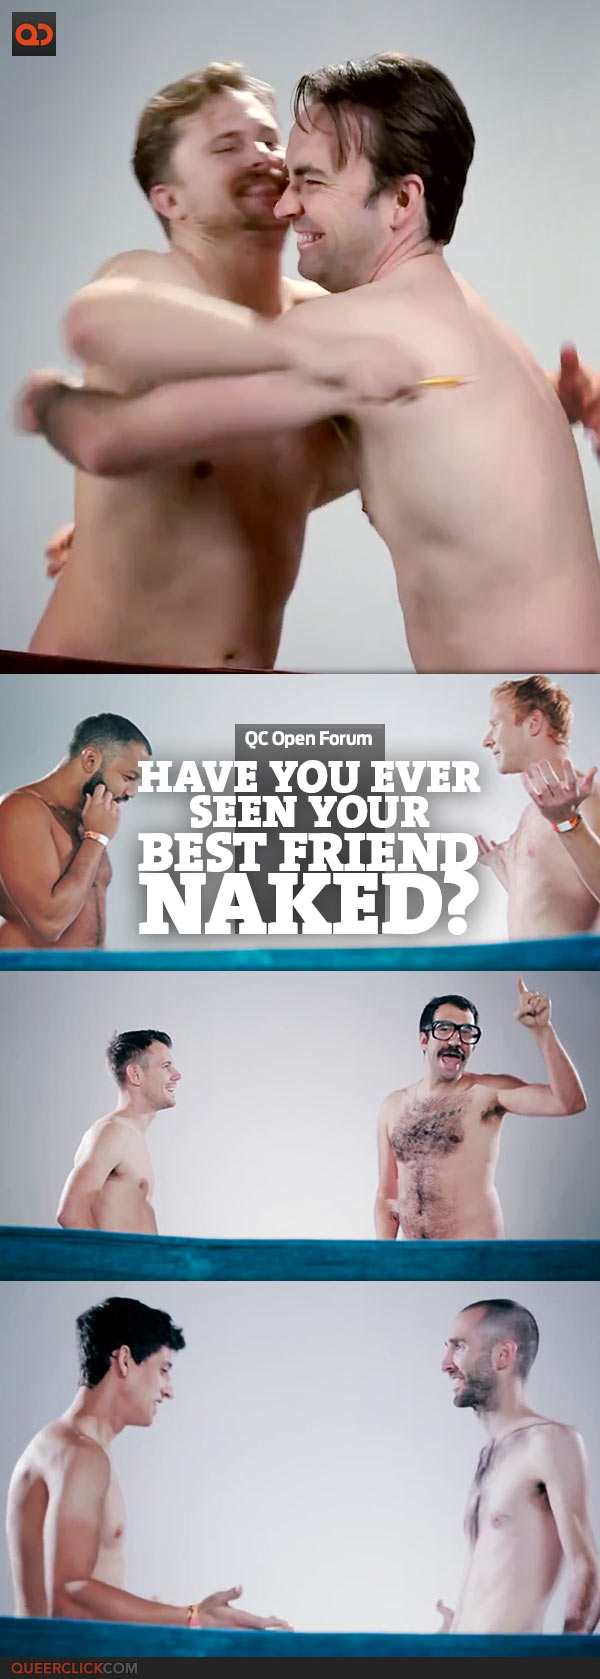 QC Open Forum: Have You Ever Seen Your Best Friend Naked?